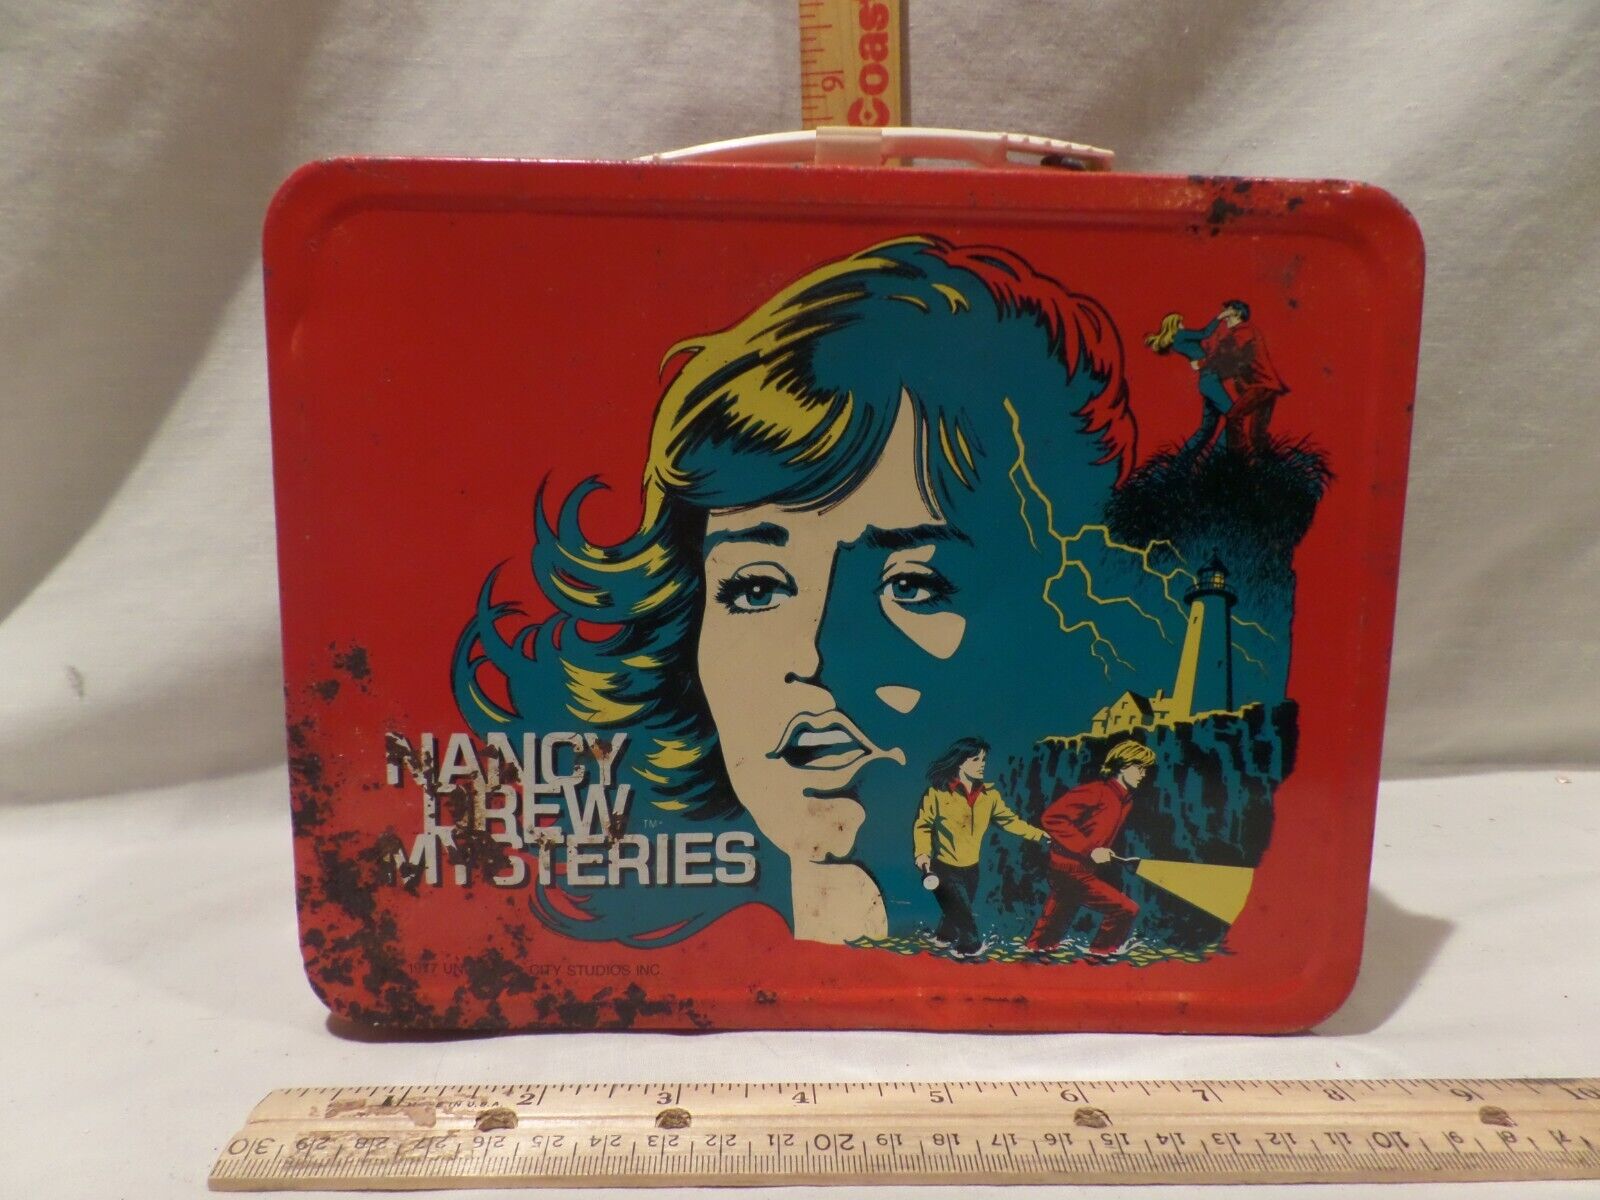 VTG Nancy Drew Mysteries 1977 Metal Lunch Box by Thermos NO THERMOS